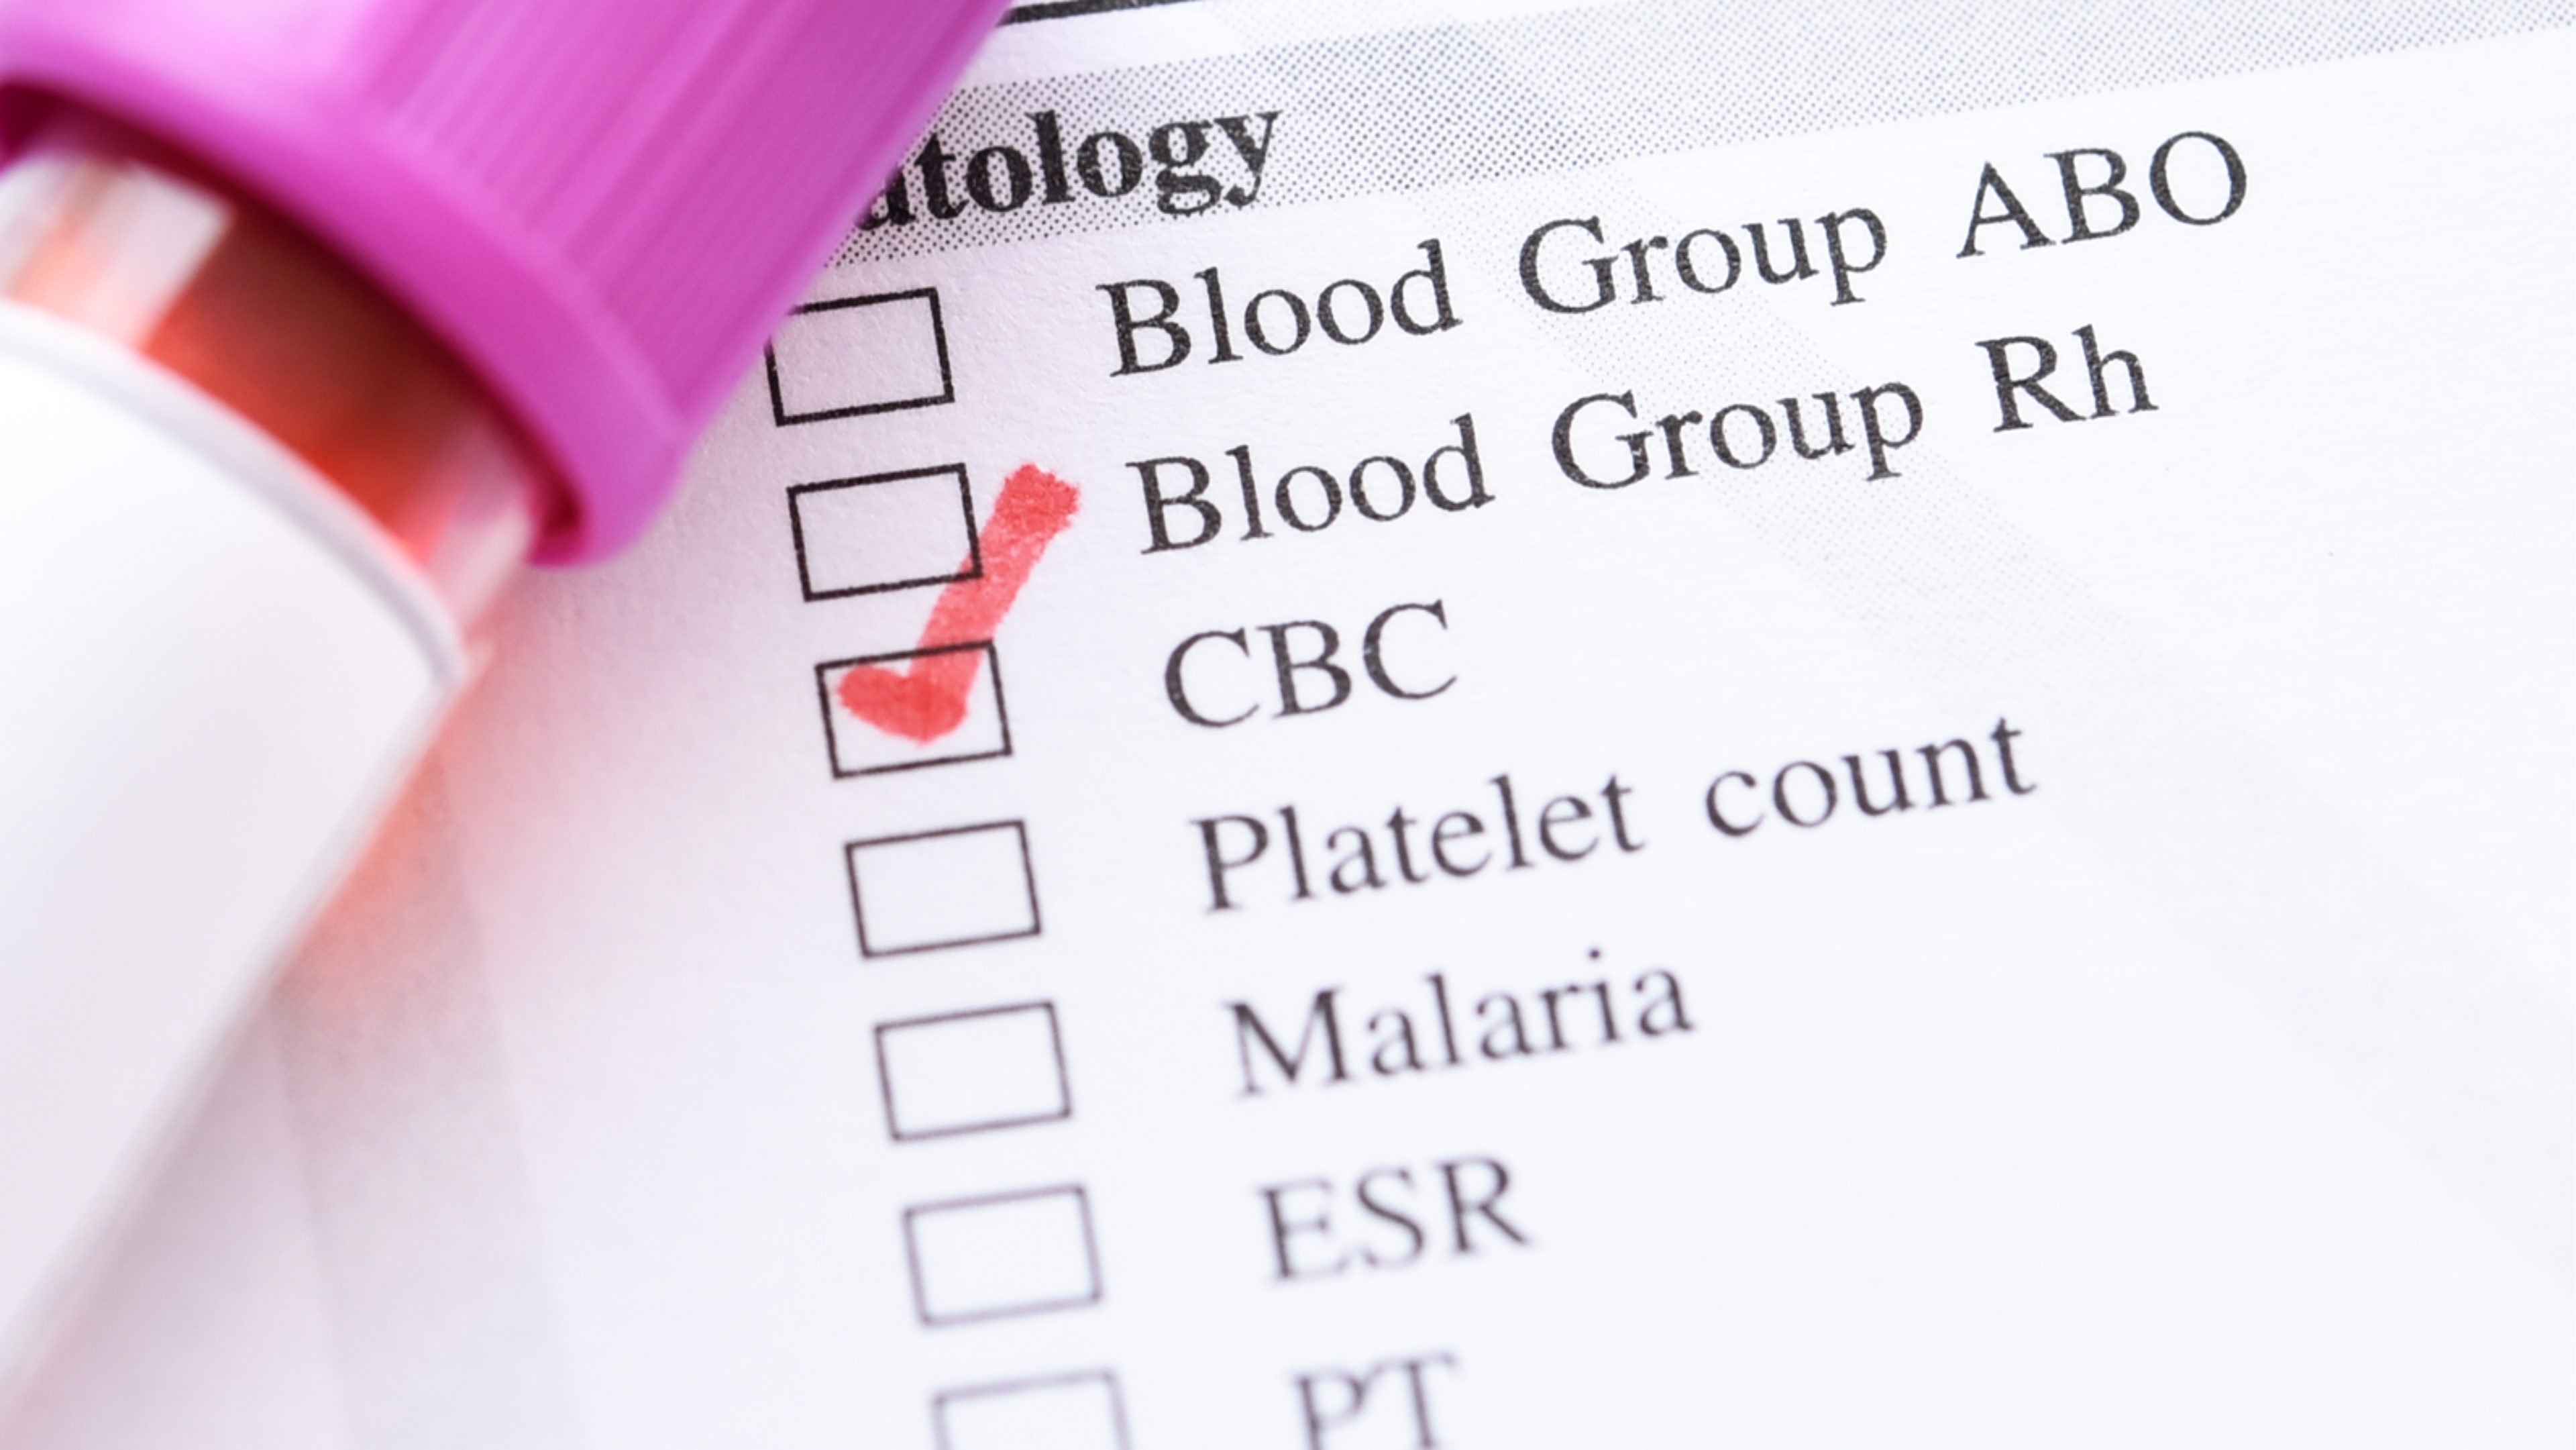 A checklist of pathology where CBC is checked